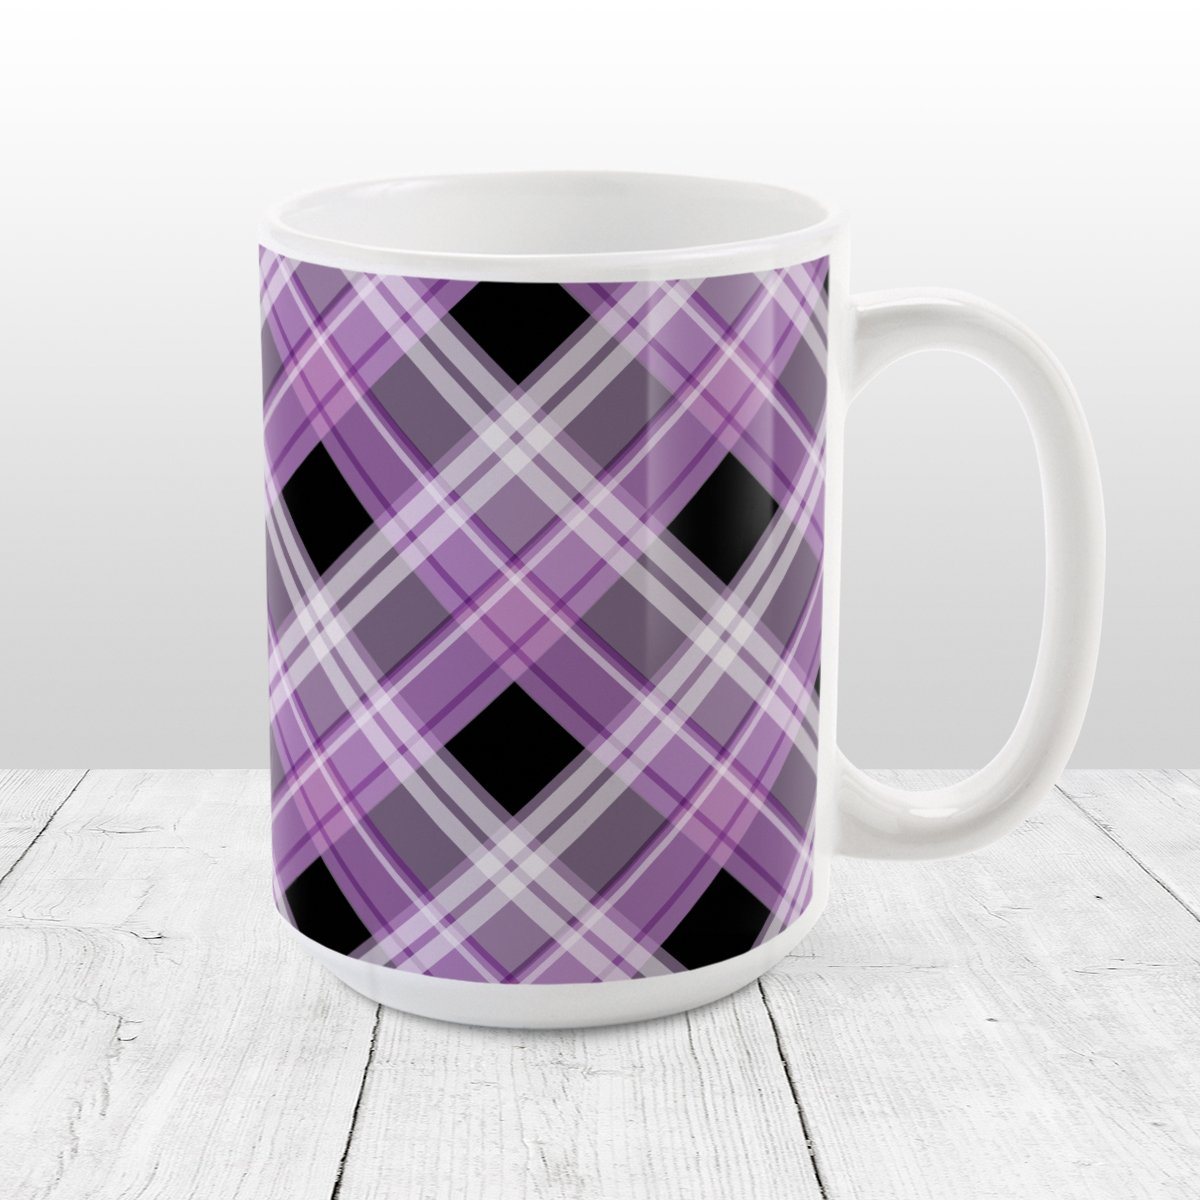 Alternative Purple Plaid Mug (15oz) at Amy's Coffee Mugs. A ceramic coffee mug designed with a diagonal purple, black, and white plaid pattern that wraps around the mug to the handle. Designed for someone who loves plaid patterns and the colors purple and black.